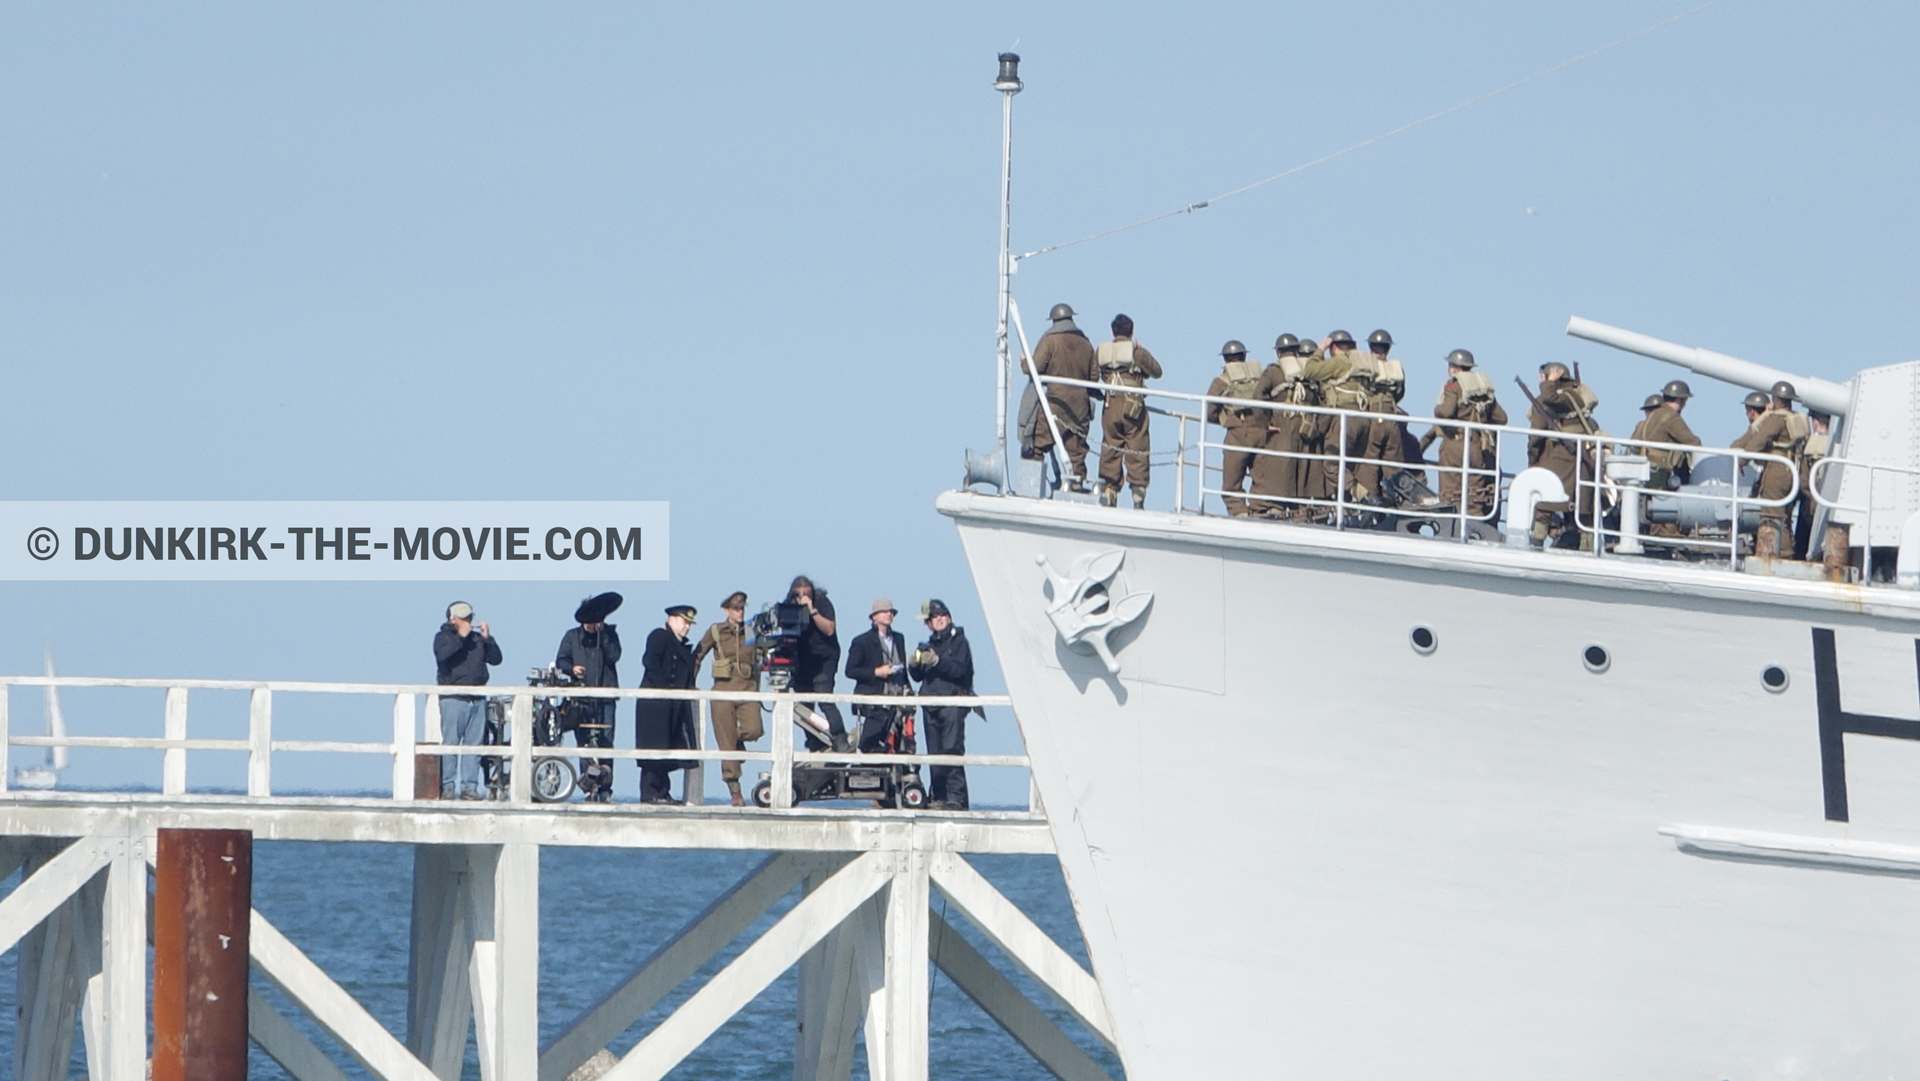 Picture with actor, IMAX camera, blue sky, supernumeraries, H32 - Hr.Ms. Sittard, Hoyte van Hoytema, EST pier, Kenneth Branagh, Christopher Nolan,  from behind the scene of the Dunkirk movie by Nolan